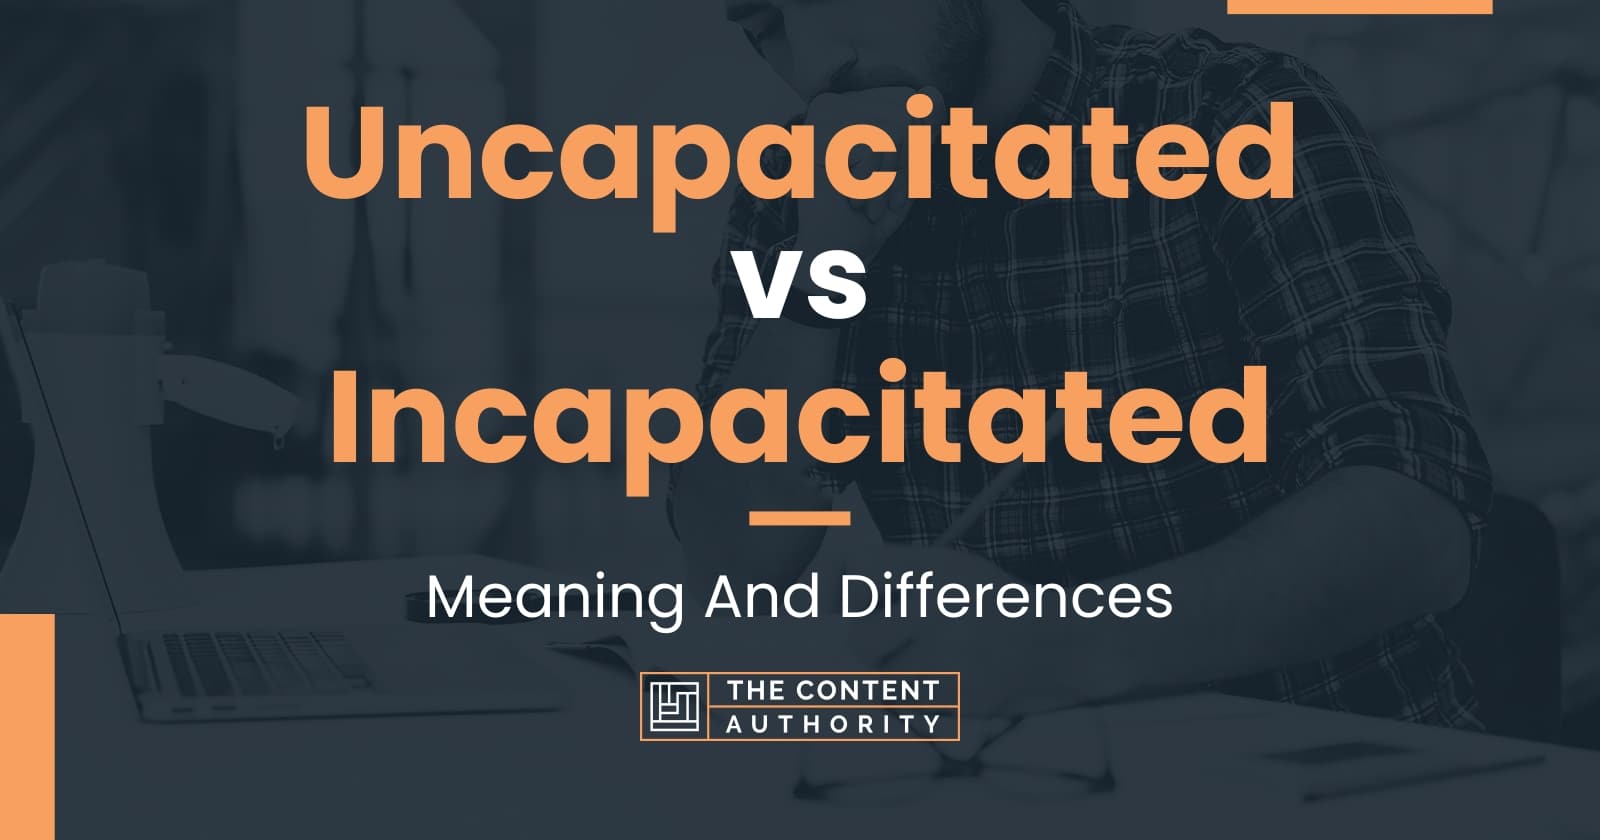 Uncapacitated vs Incapacitated: Meaning And Differences